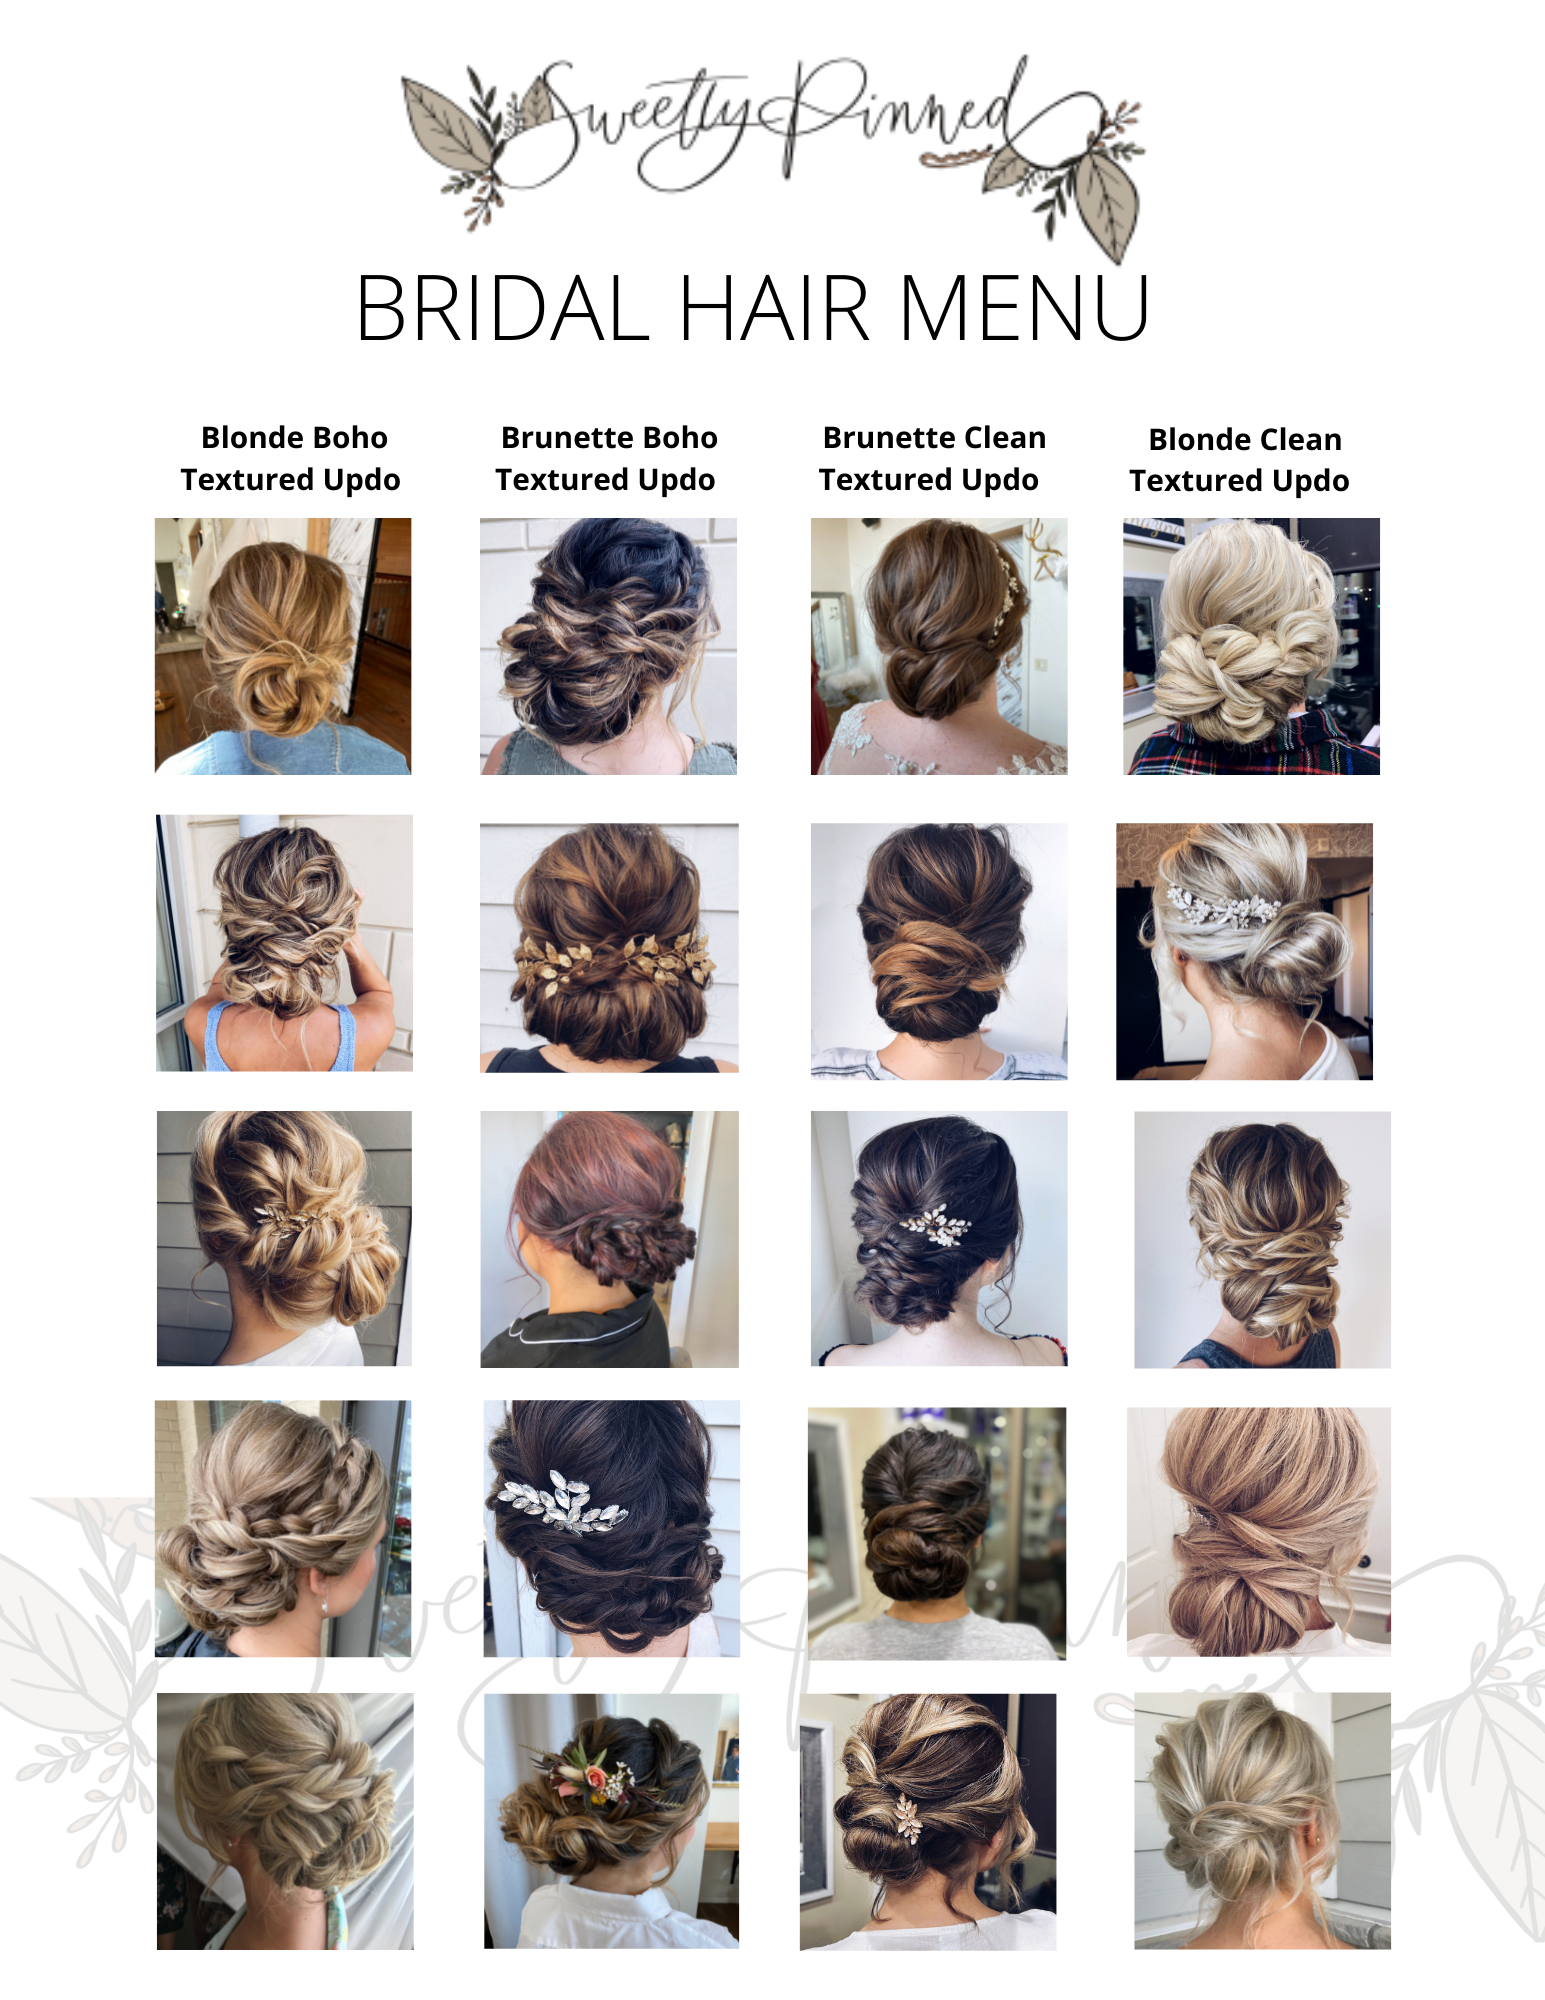 The essential guide to 2020 wedding hair | Updos, ponytails, soft waves